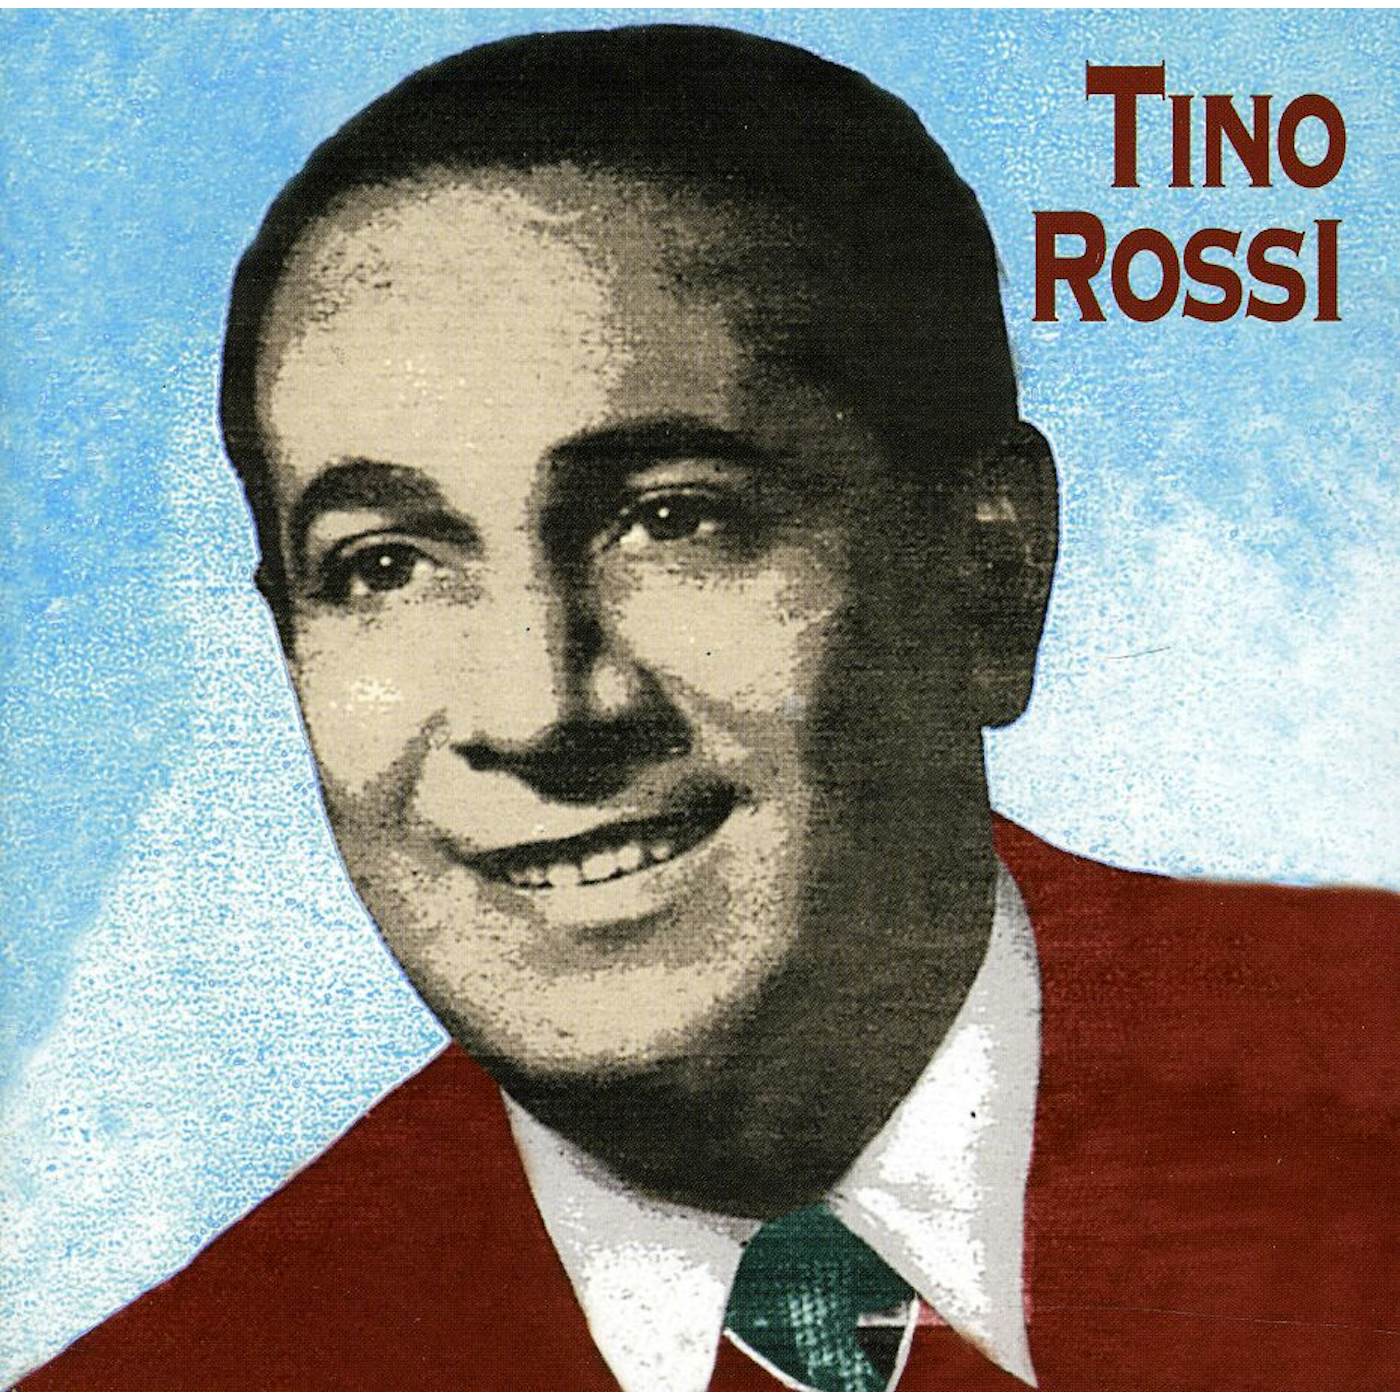 Tino Rossi GOLD MUSIC CD